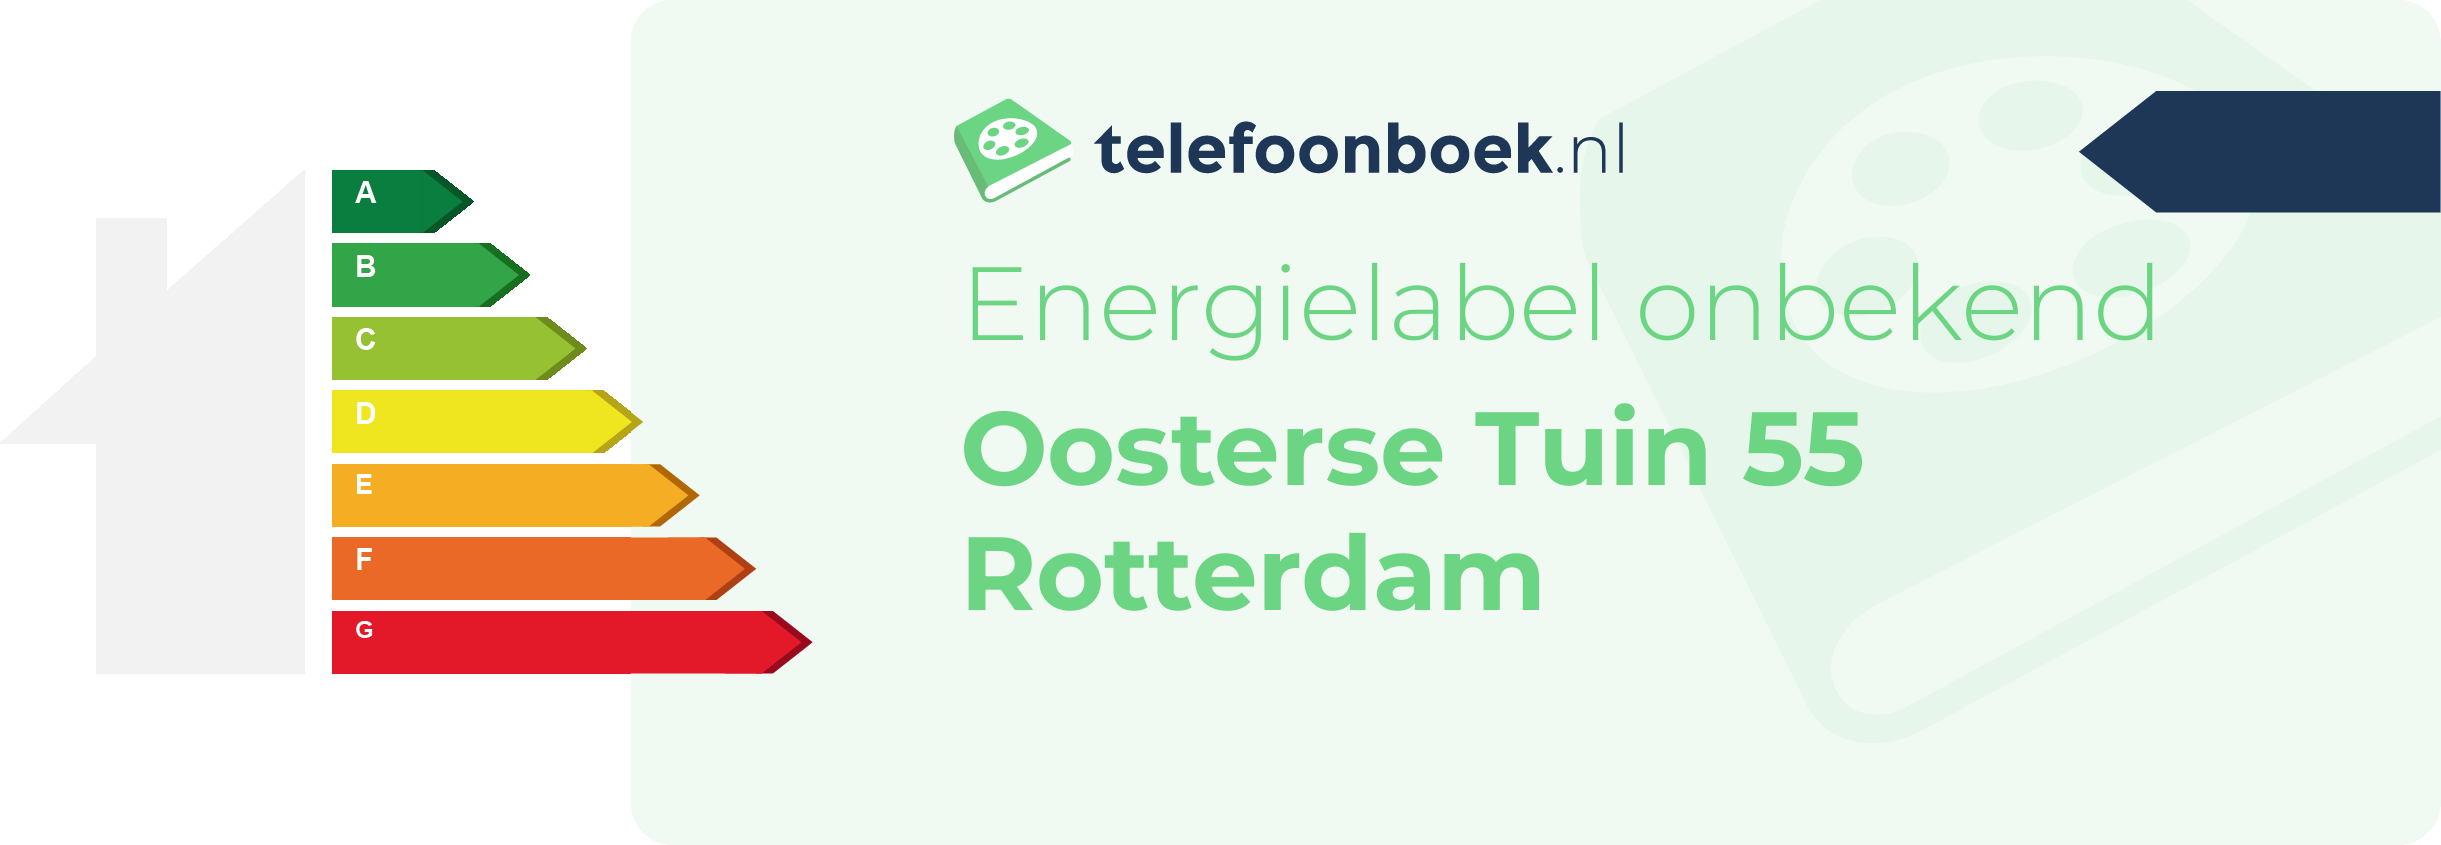 Energielabel Oosterse Tuin 55 Rotterdam